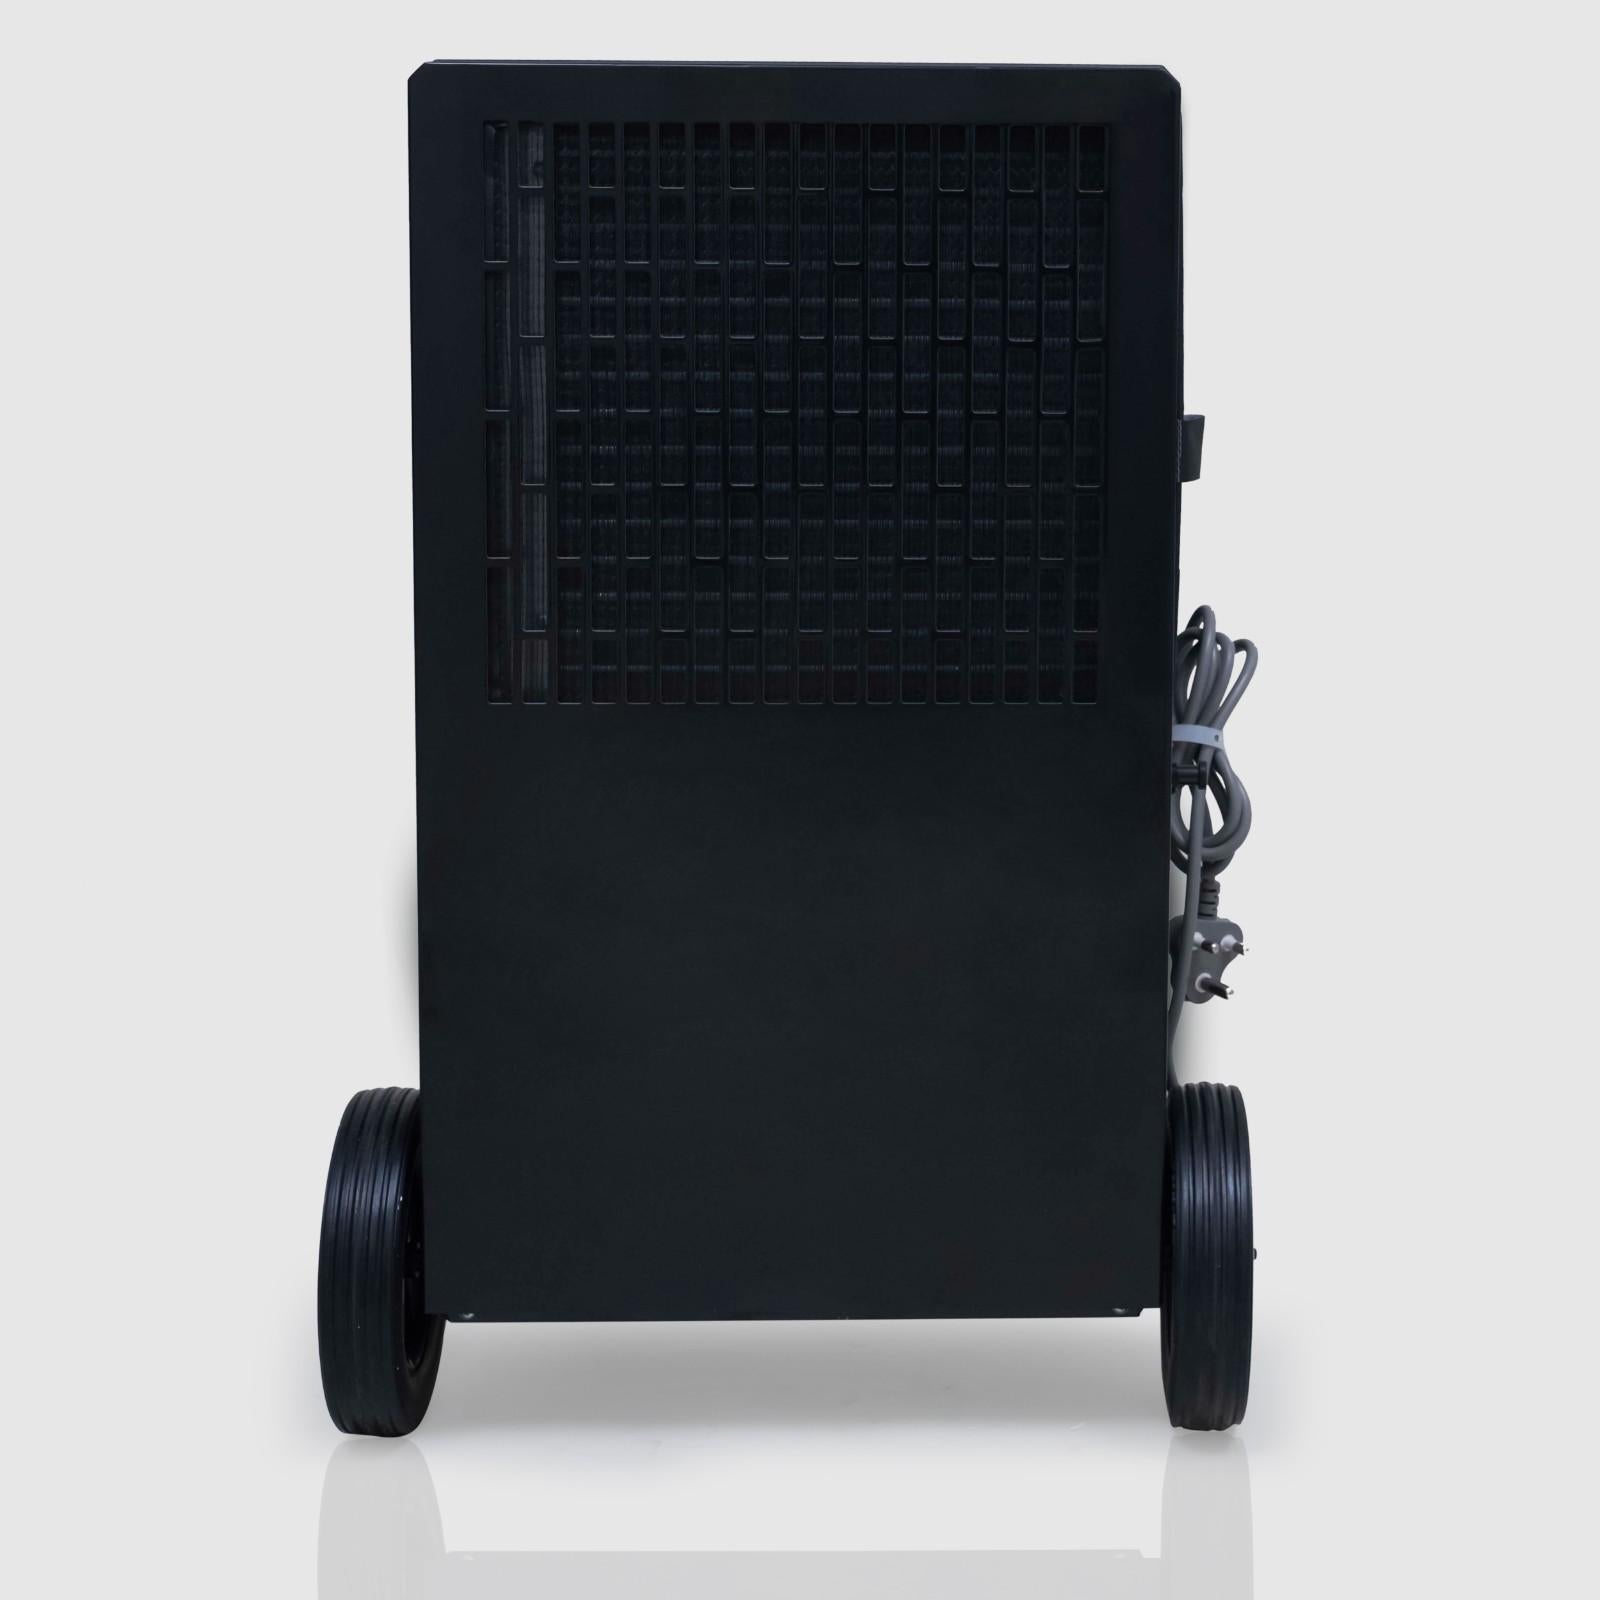 Rear view of the White Westinghouse Industrial Dehumidifier WDE100, showing the large rear wheels and rear vent for optimal airflow. The design includes a power cord neatly wrapped on the side, emphasizing durability and ease of mobility, suitable for large commercial and industrial spaces.